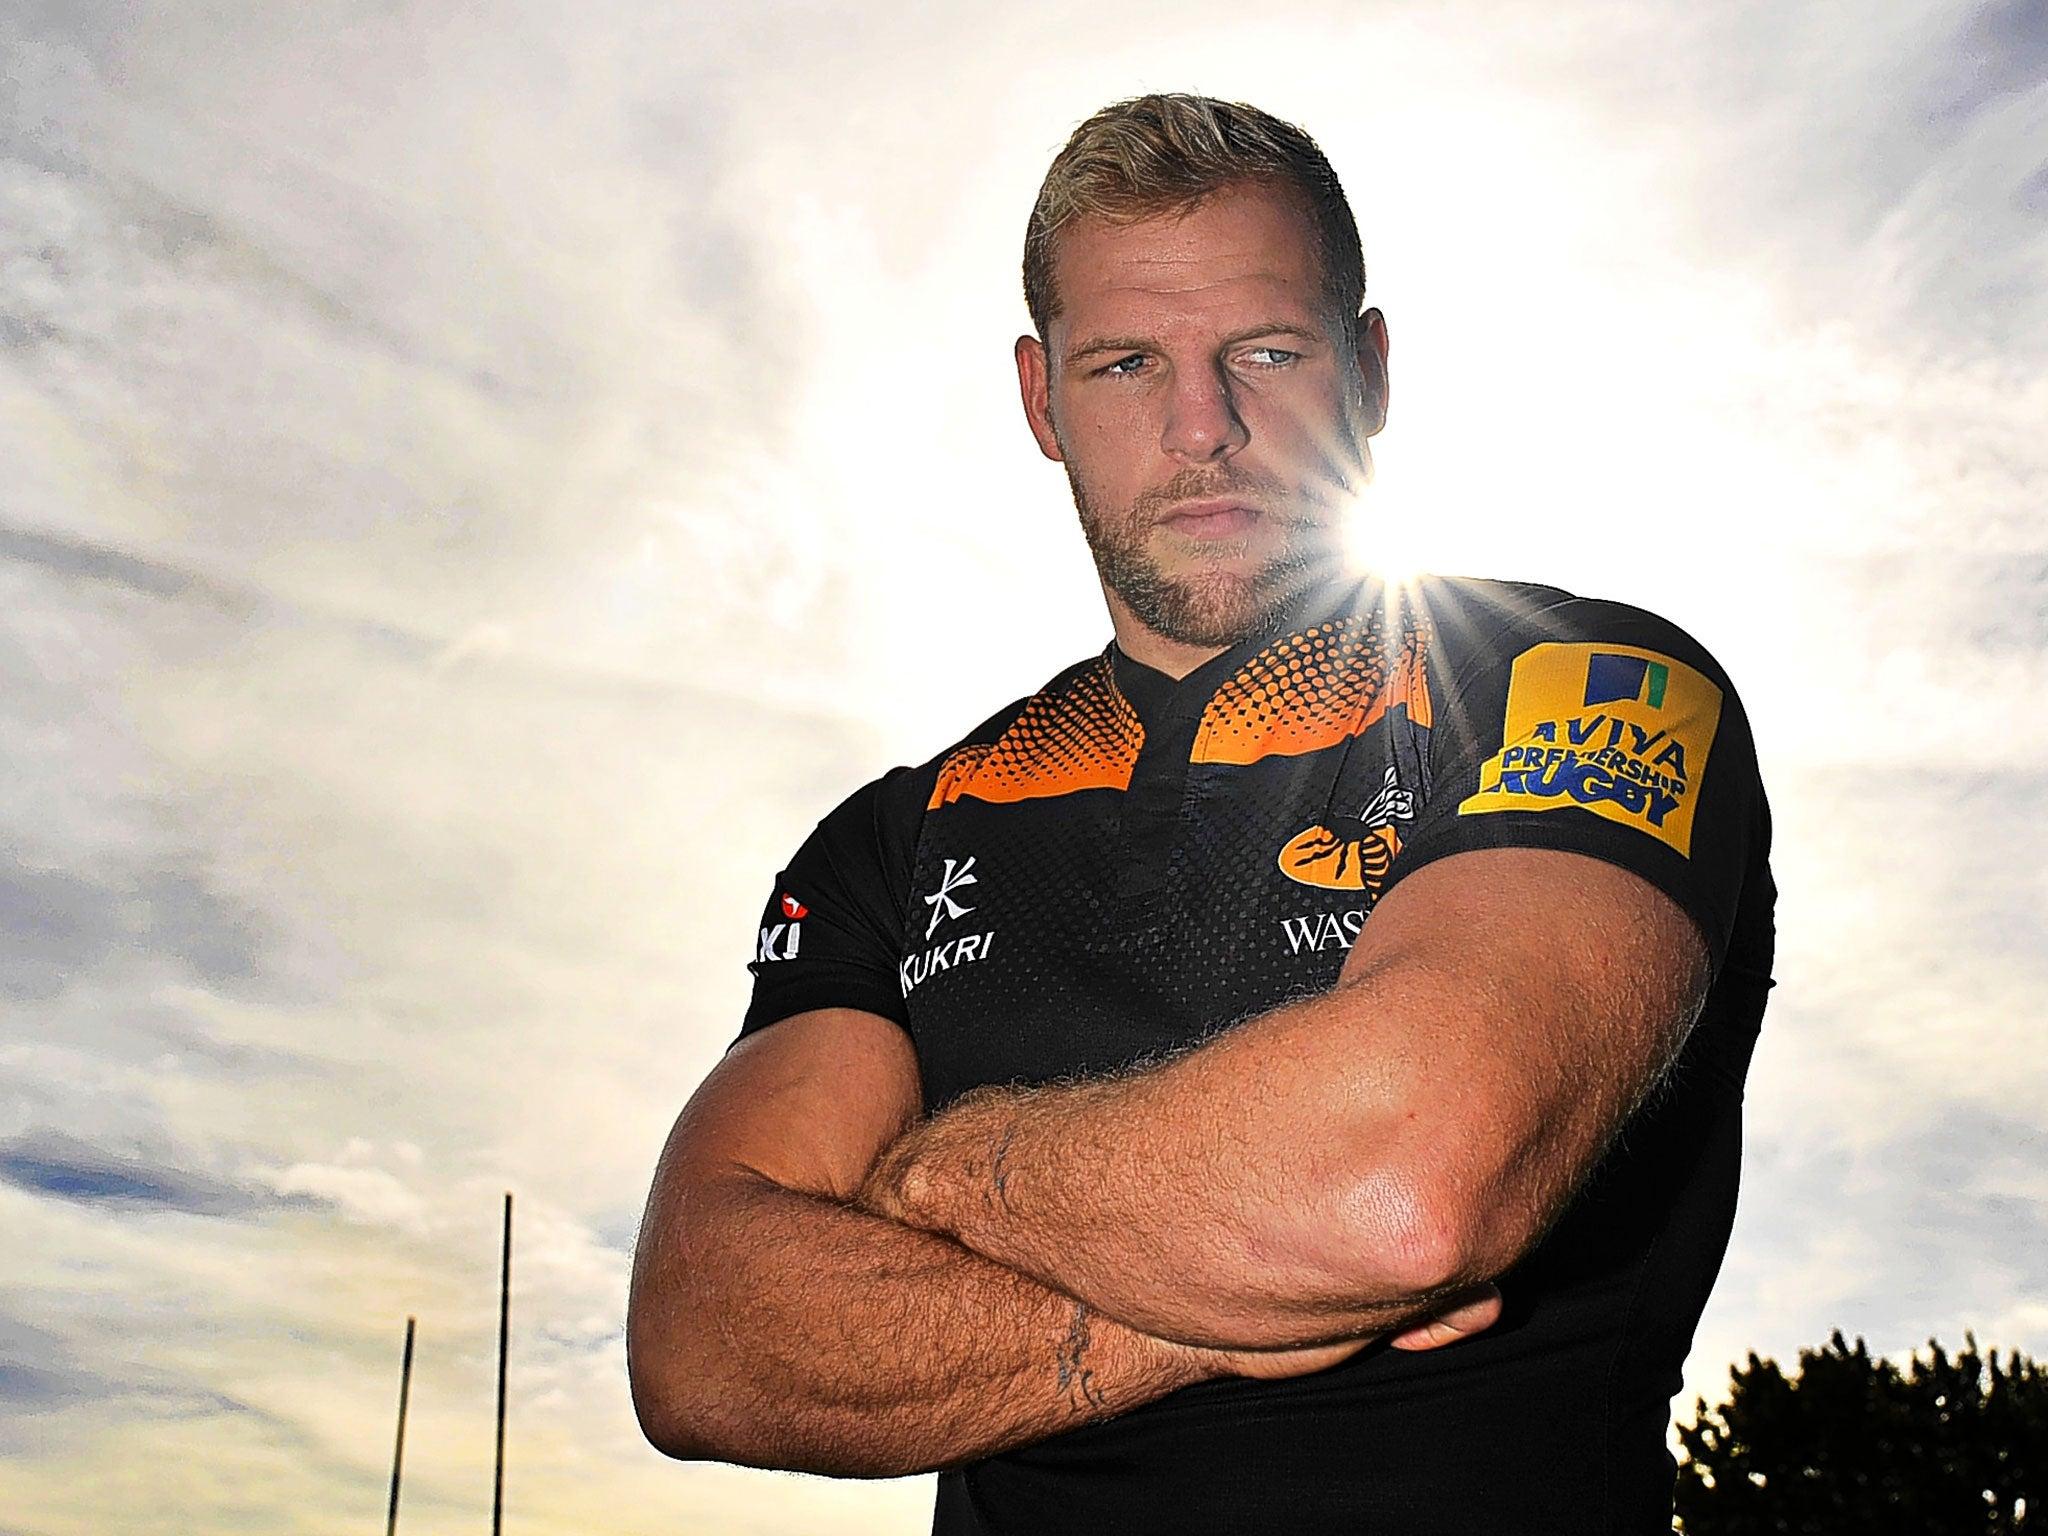 James Haskell happy to be home after his world tour